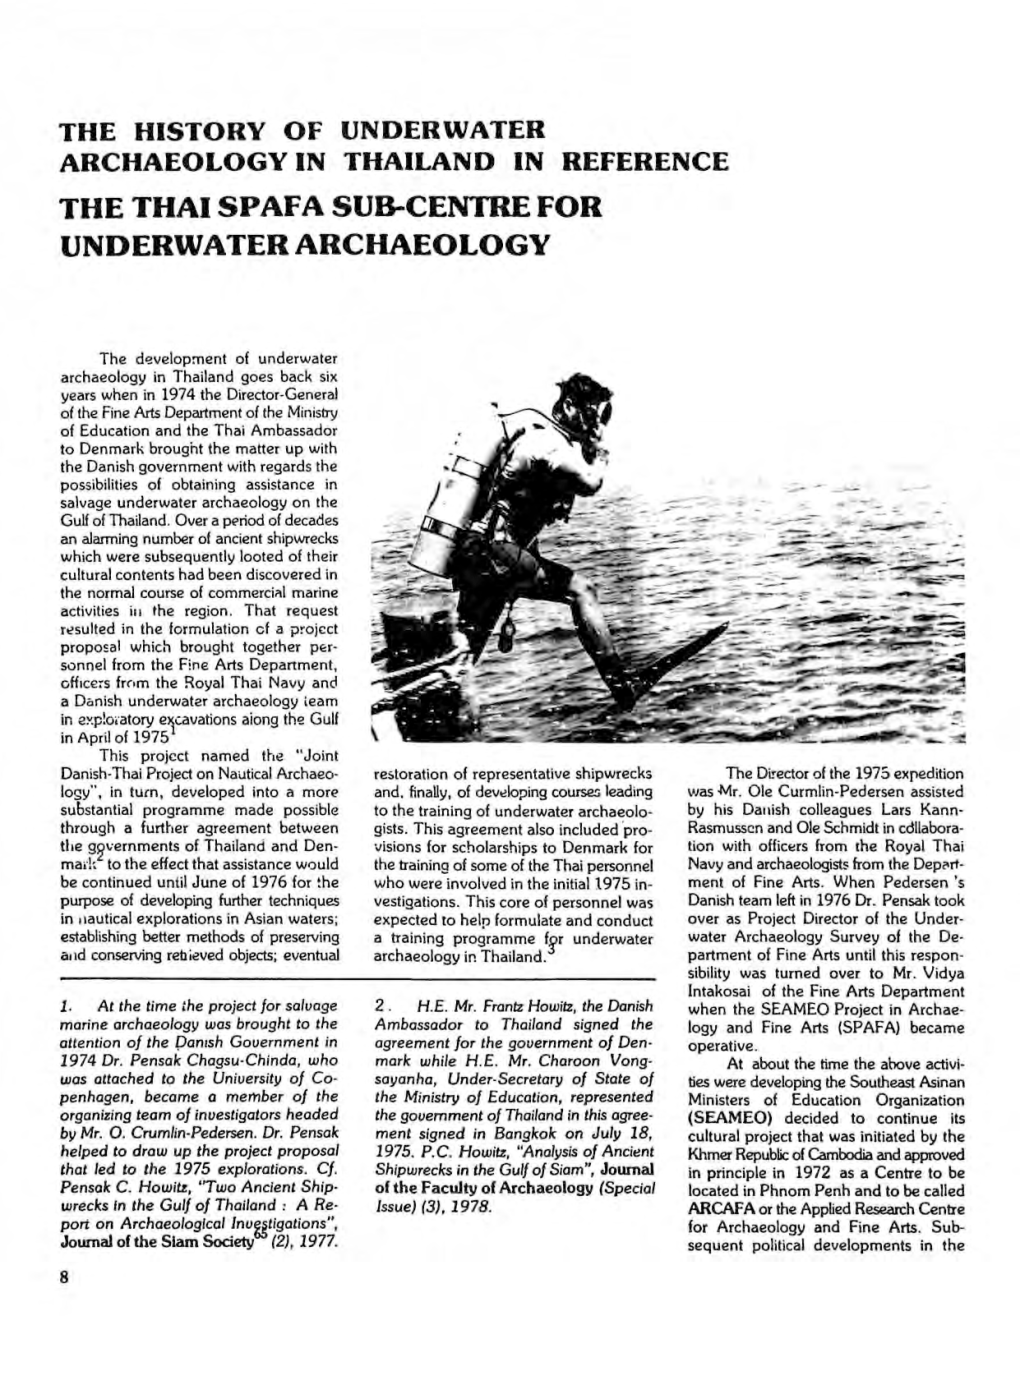 The Thai Spafa Sub-Centre for Underwater Archaeology